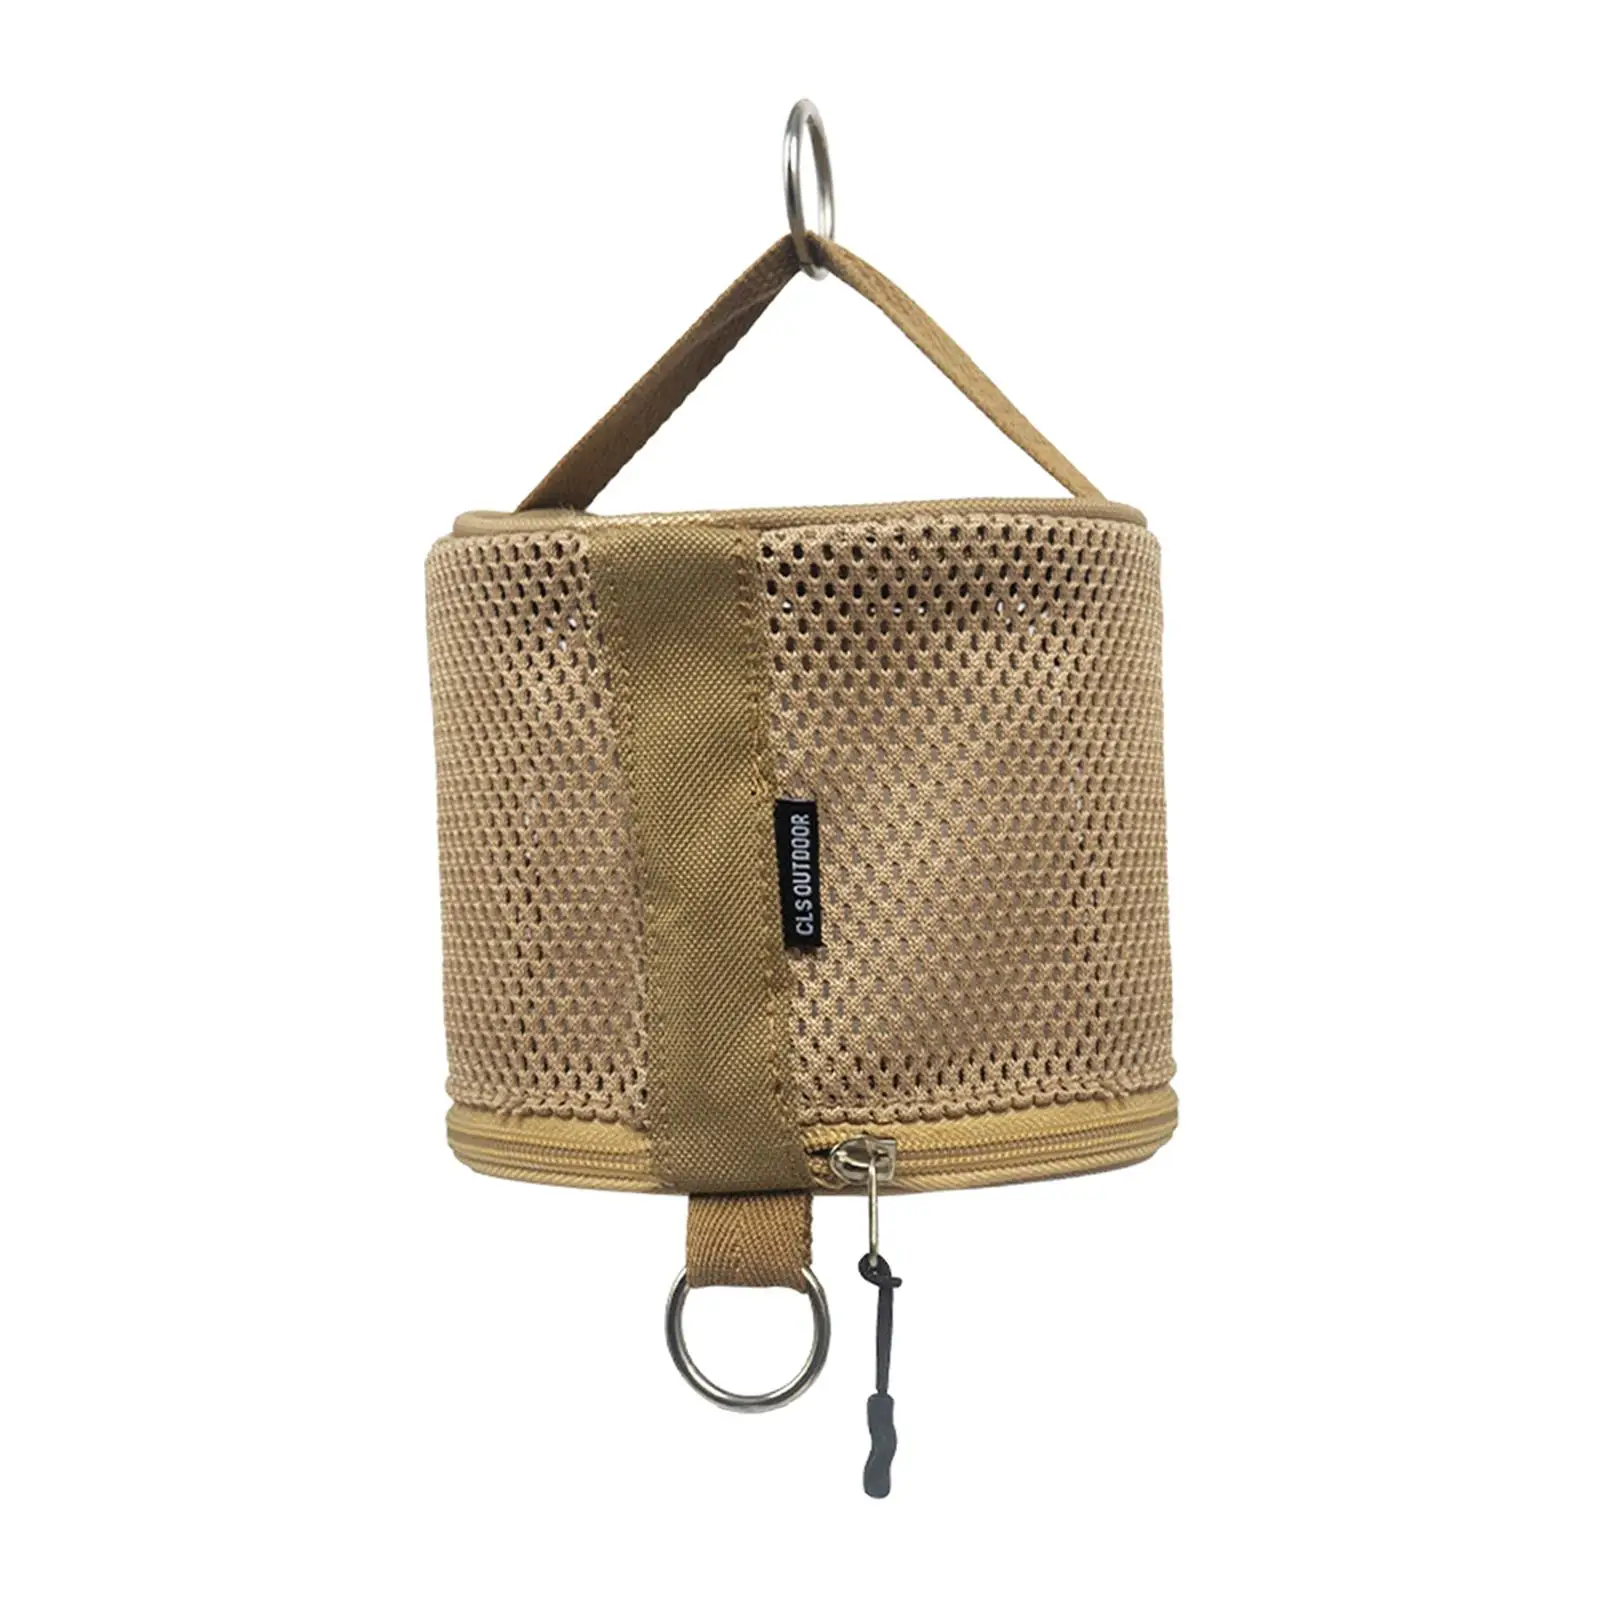 Outdoor Toilet Paper Holder Wipe Dispenser with Metal Rings Portable Hanging Paper Roll Holder Tissue Dispenser for Hiking Tent